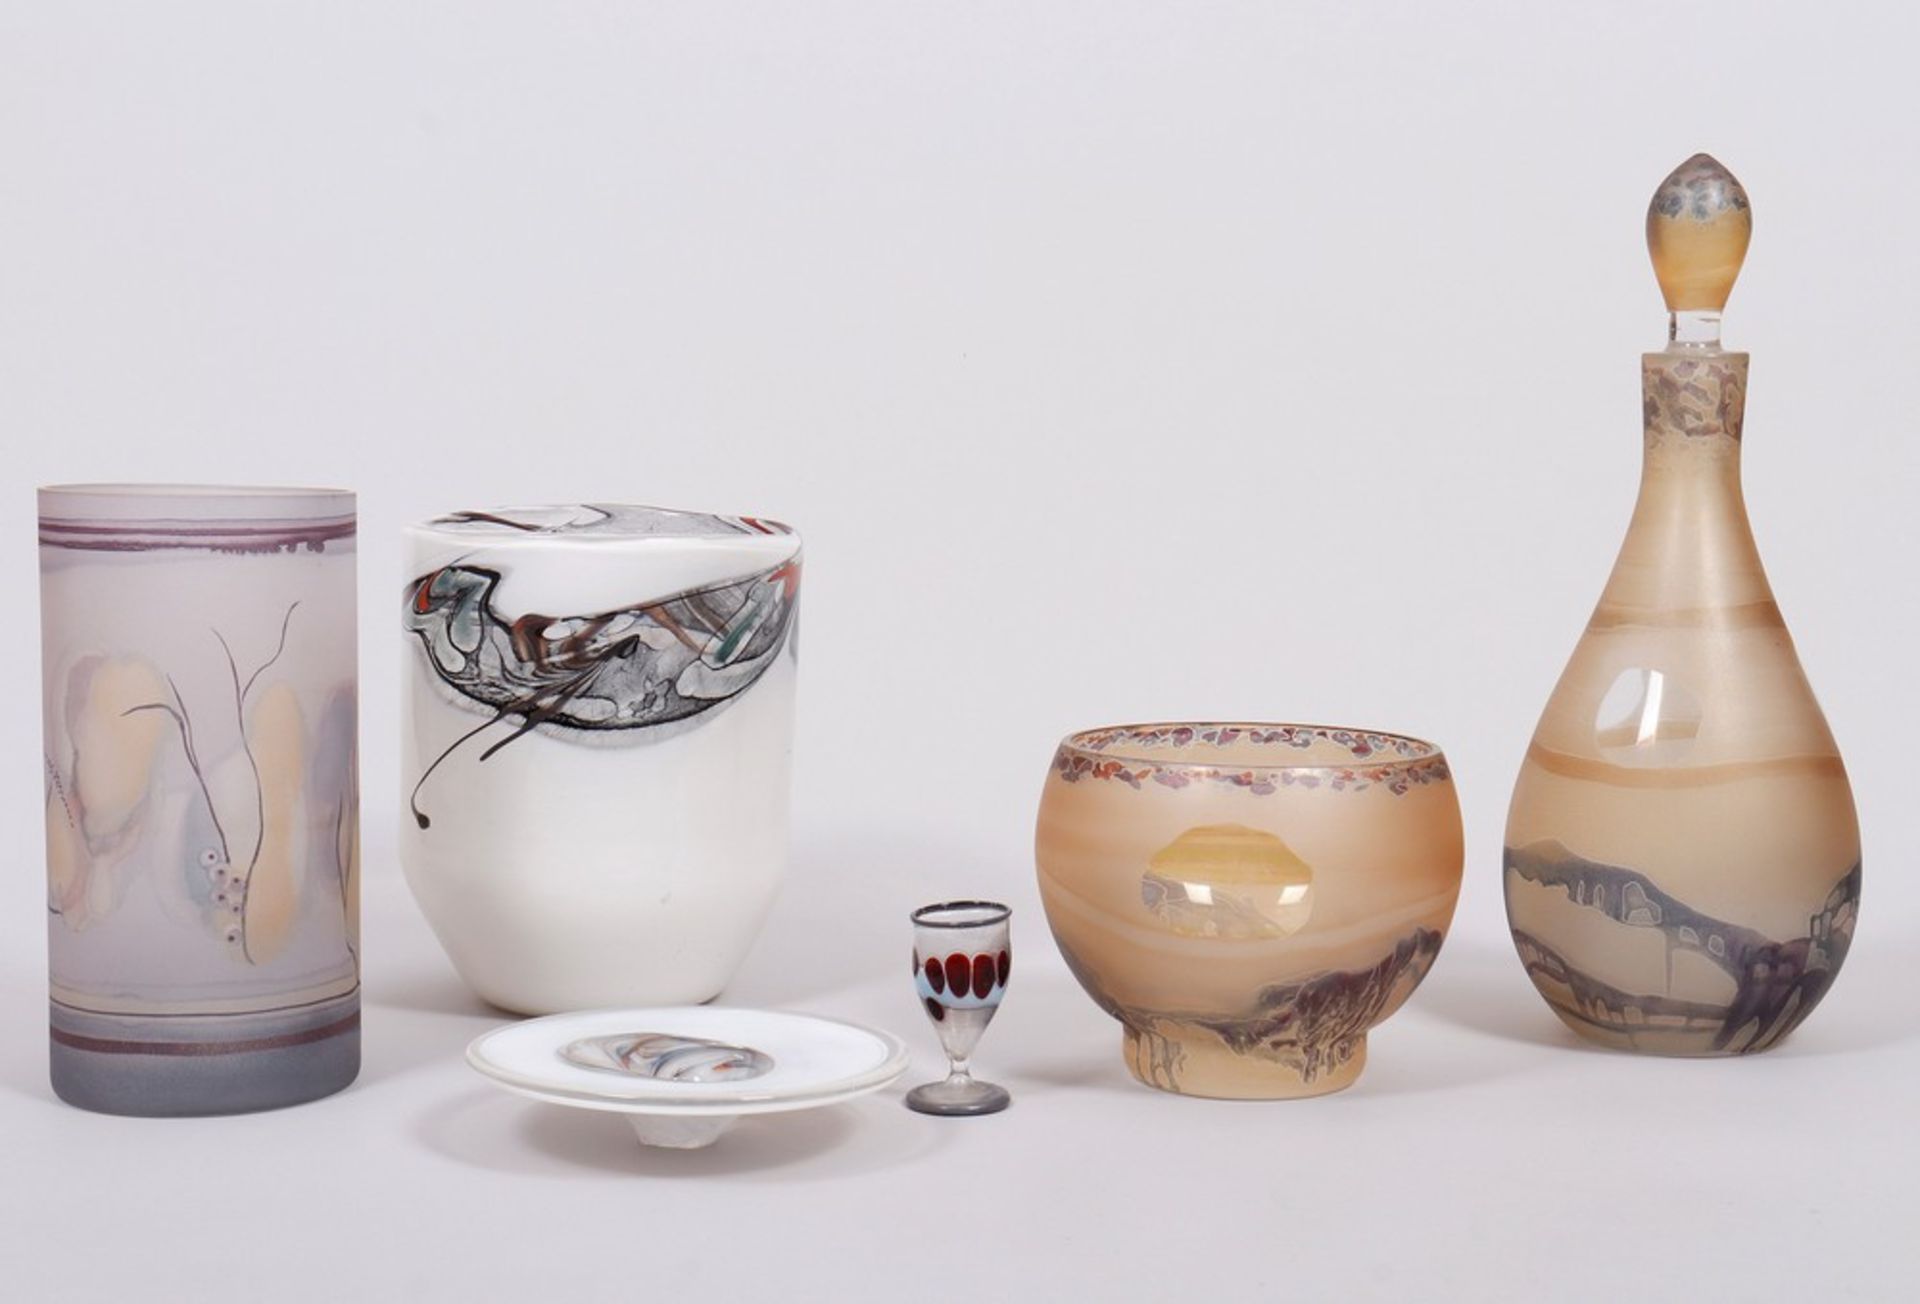 Mixed lot of studio glass, Helmut W. Hundstorfer/Hartmut Müller and others, 1980s, 6 pieces